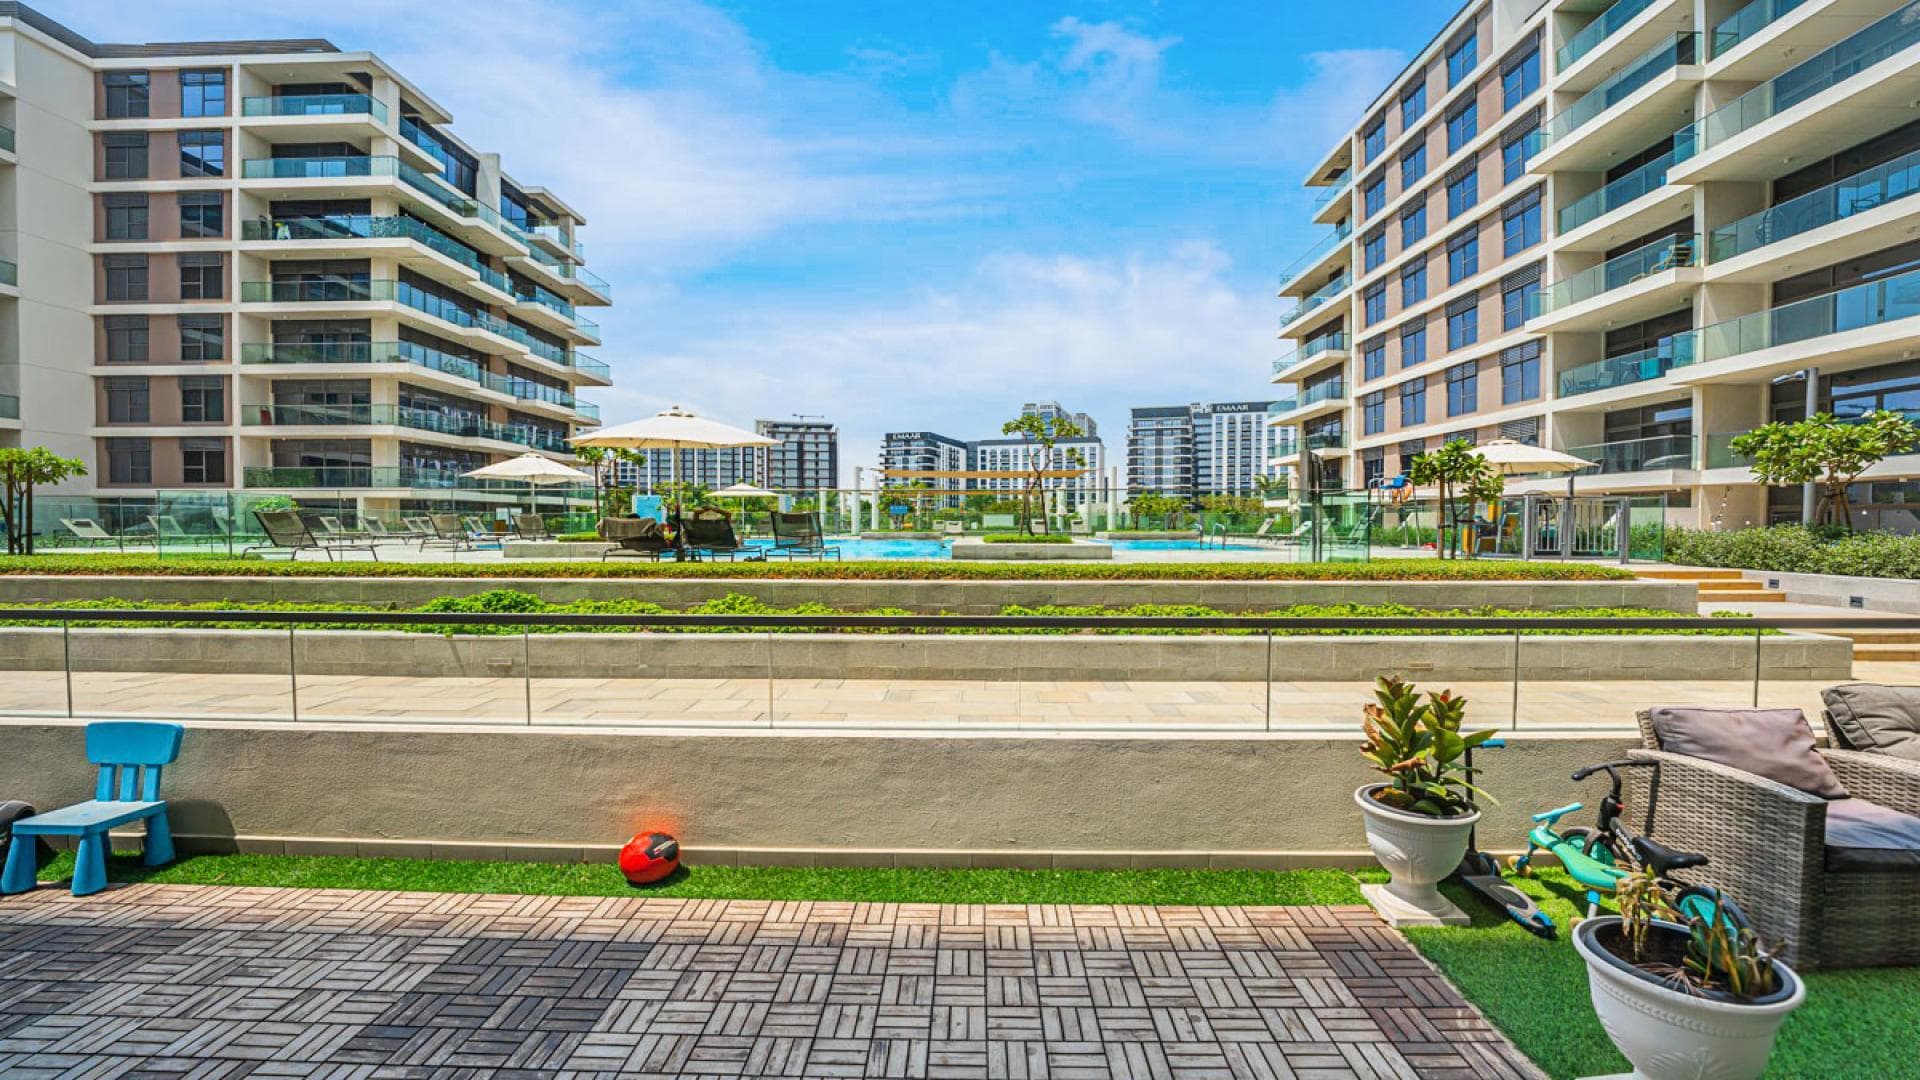 2 Bedroom Apartment For Sale Mira Oasis 2 Lp38886 14d306754a54eb00.jpeg